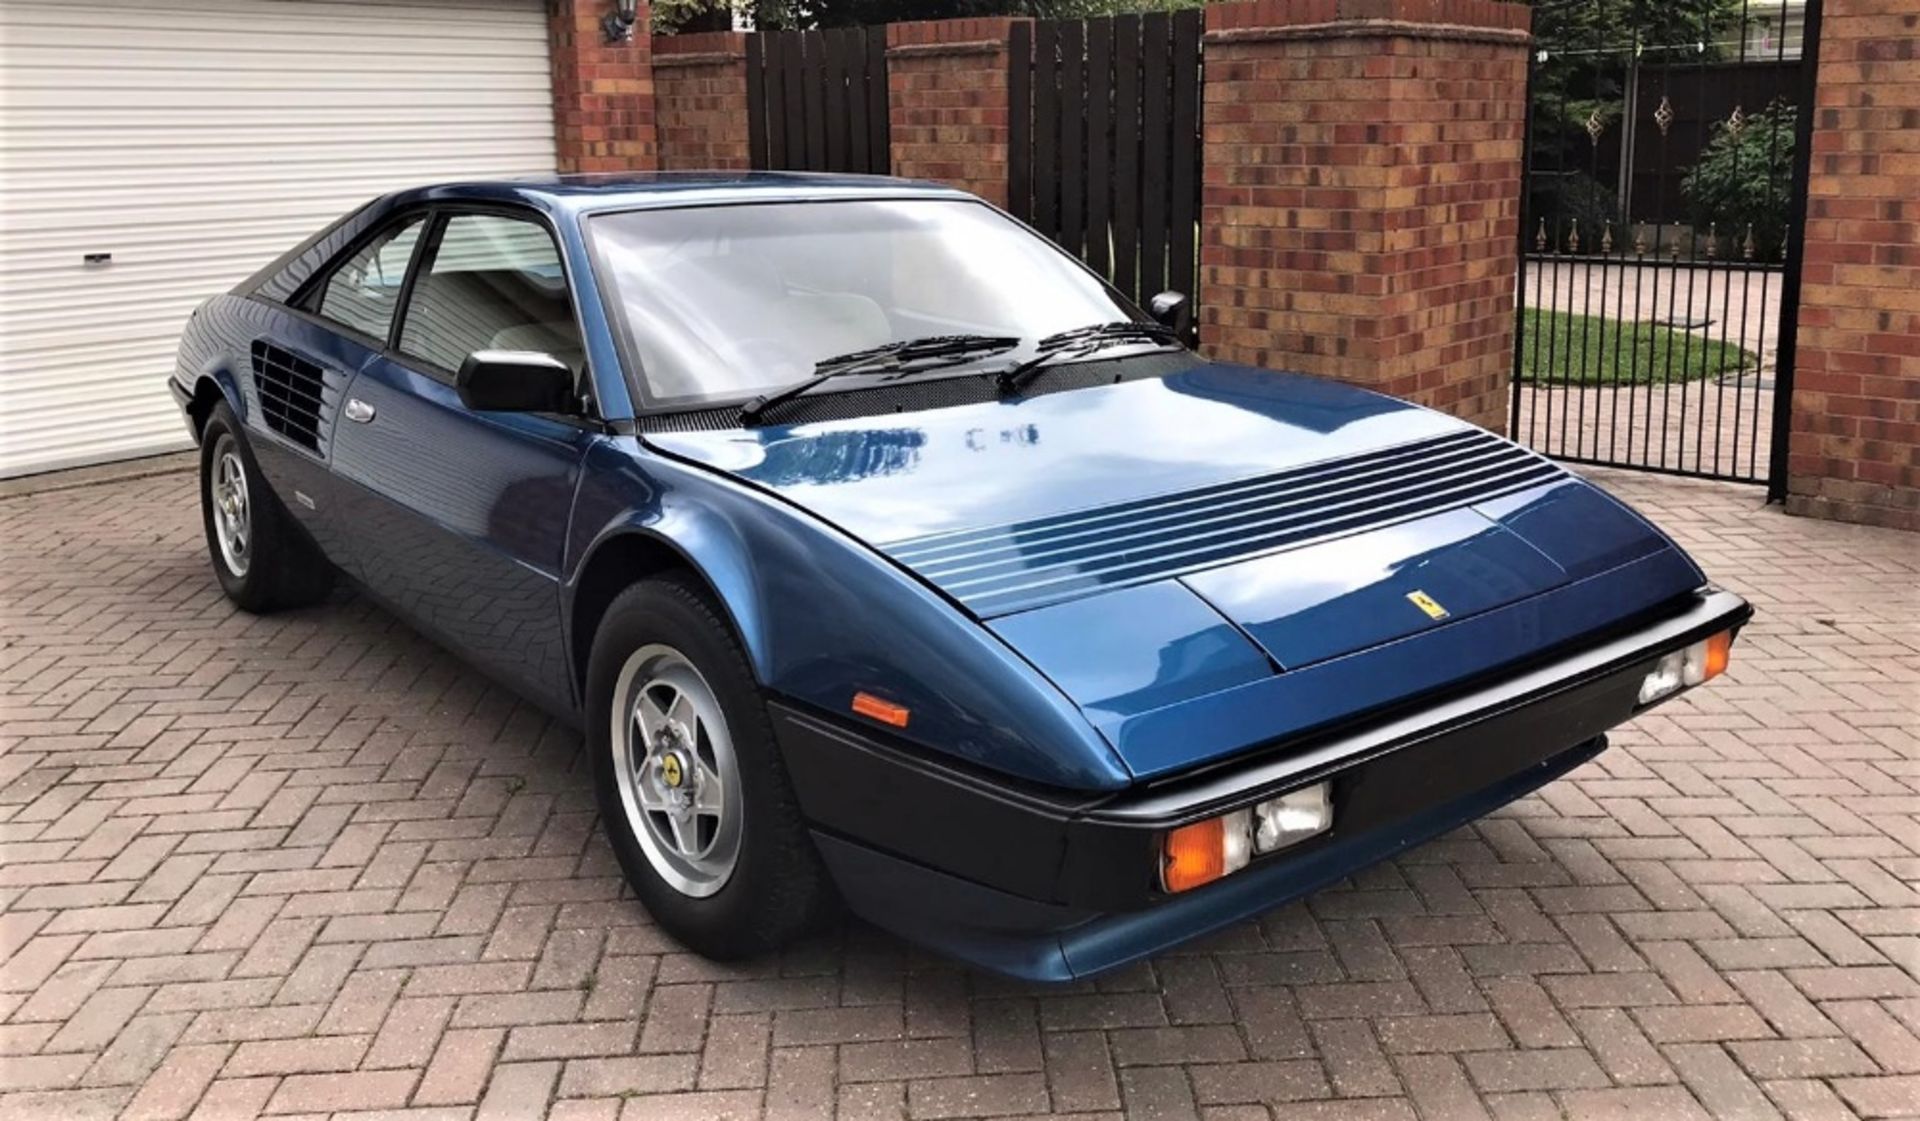 1982 FERRARI MONDIAL COUPE Registration Number: TBA Chassis Number: ZFFLD14B000044063 Recorded